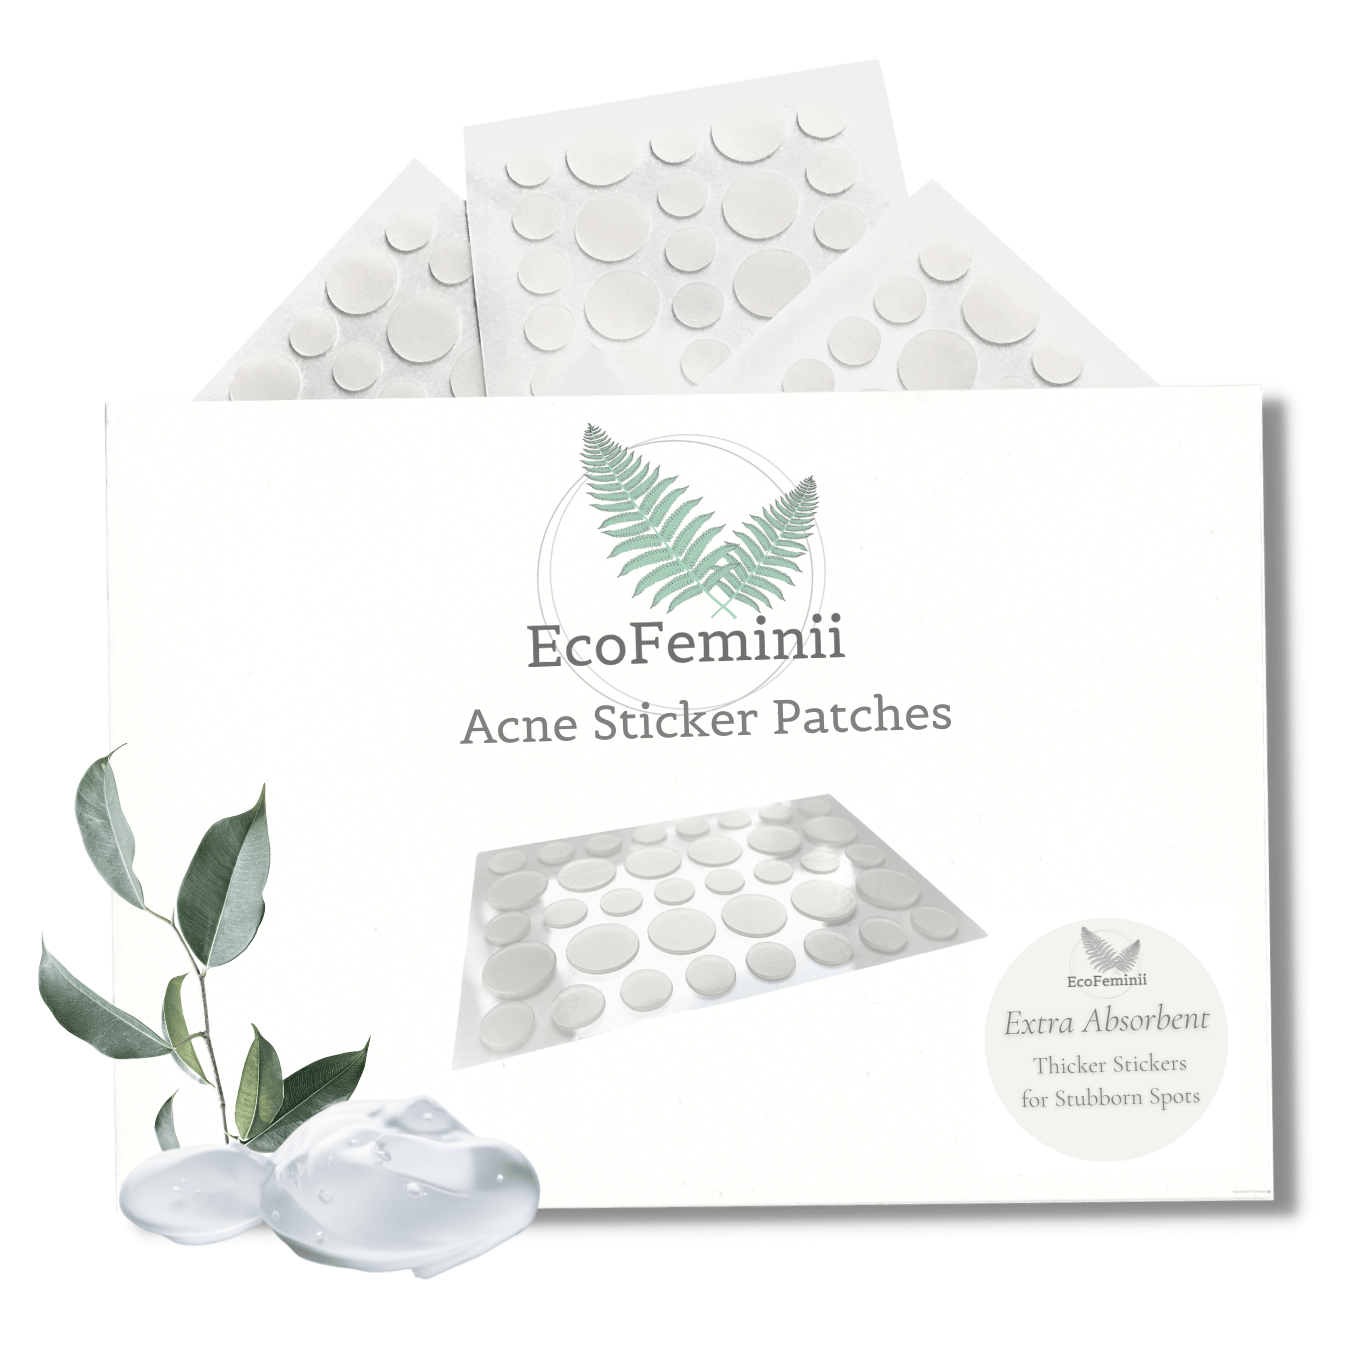  EcoFeminii Extra Absorbent Targeted Spot &amp; Blemish Repair Acne Sticker Patches-108 Count/3 Sheets-Absorbing Hydrocolloid Dots-Effective on Oily &amp; Combination Skin-Transparent Remedy for Pimples -Eco-Friendlier